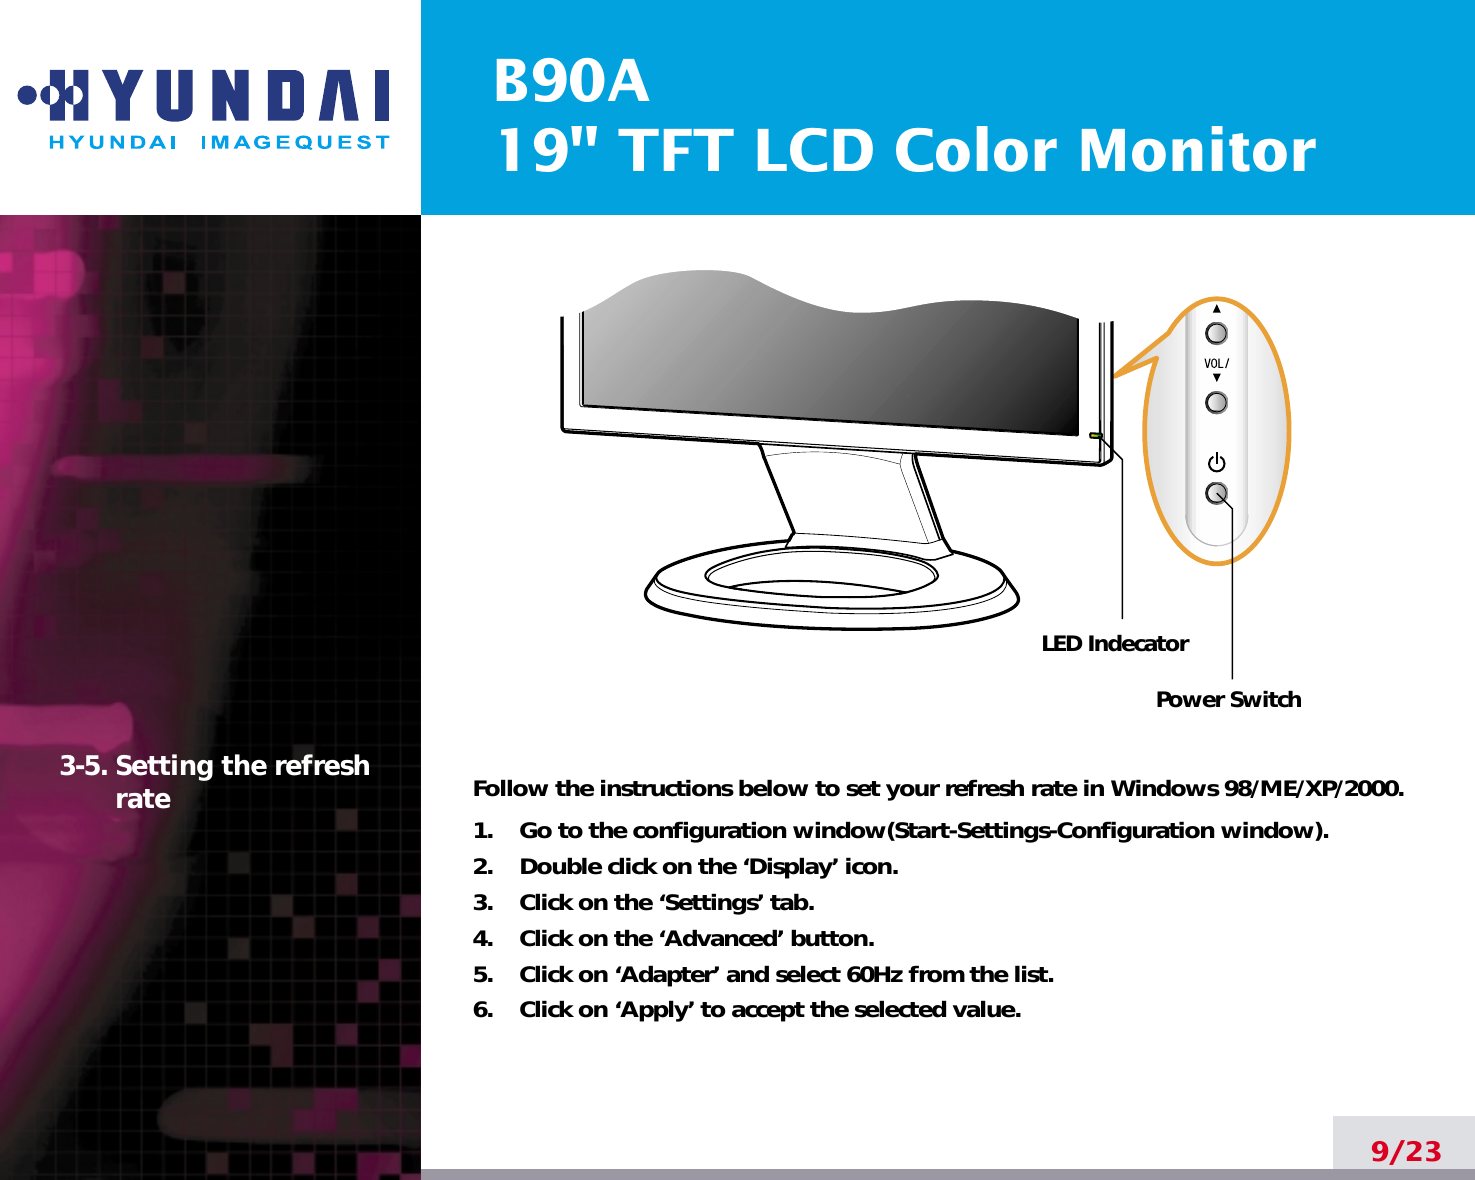 B90A19&quot; TFT LCD Color Monitor9/233-5. Setting the refreshrate Follow the instructions below to set your refresh rate in Windows 98/ME/XP/2000.1.    Go to the configuration window(Start-Settings-Configuration window).2.    Double click on the ‘Display’ icon.3.    Click on the ‘Settings’ tab.4.    Click on the ‘Advanced’ button.5.    Click on ‘Adapter’ and select 60Hz from the list.6.    Click on ‘Apply’ to accept the selected value.Power SwitchLED Indecator